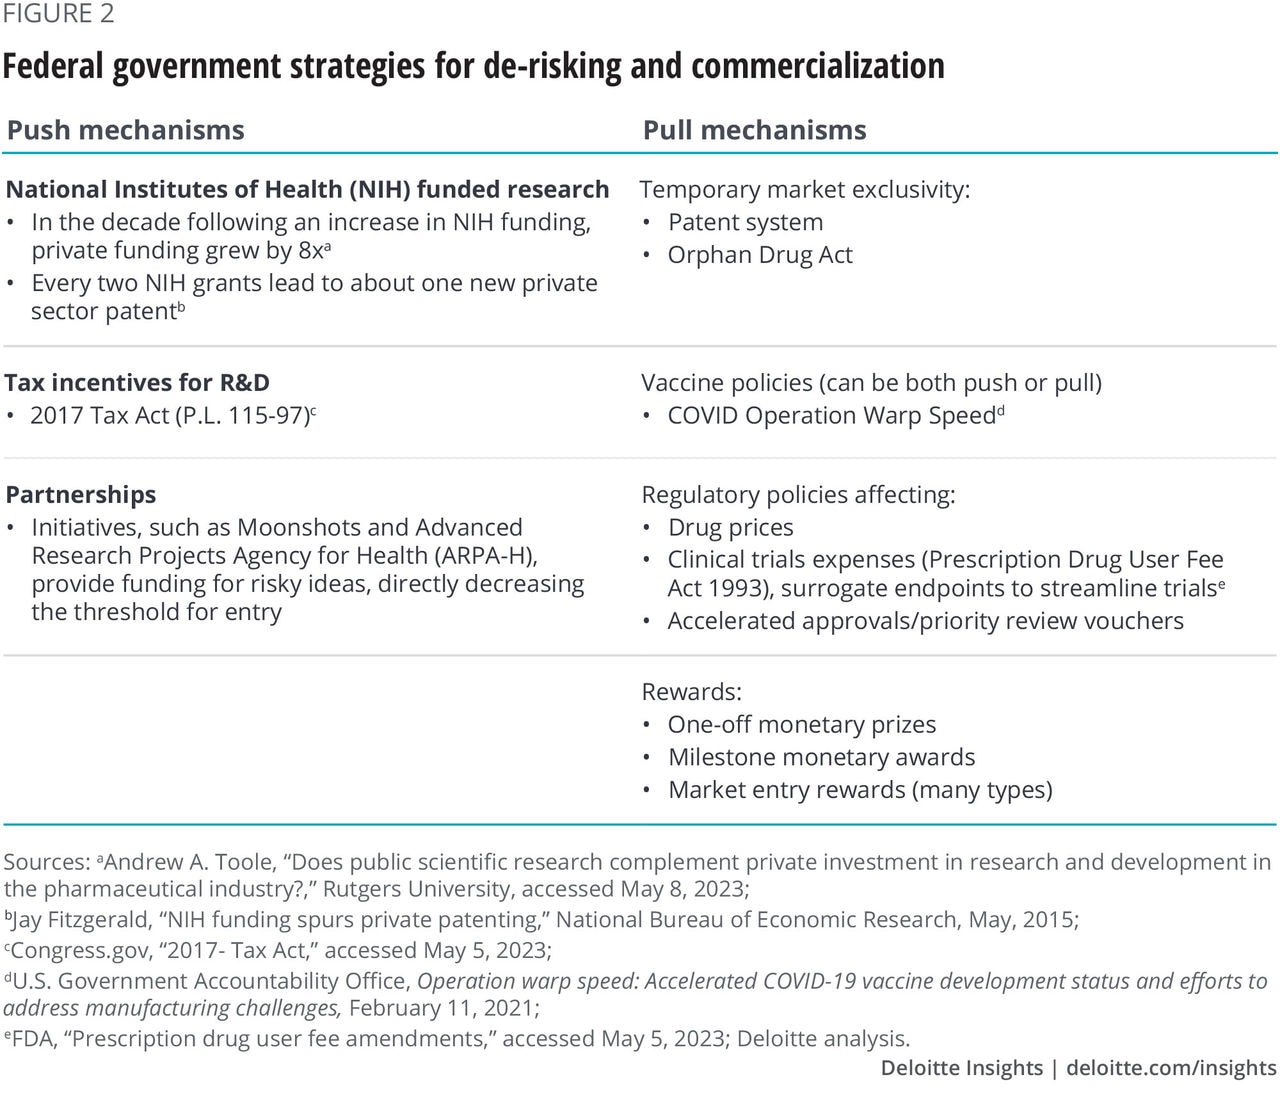 Figure 2: Federal government strategies for de-risking and commercialization